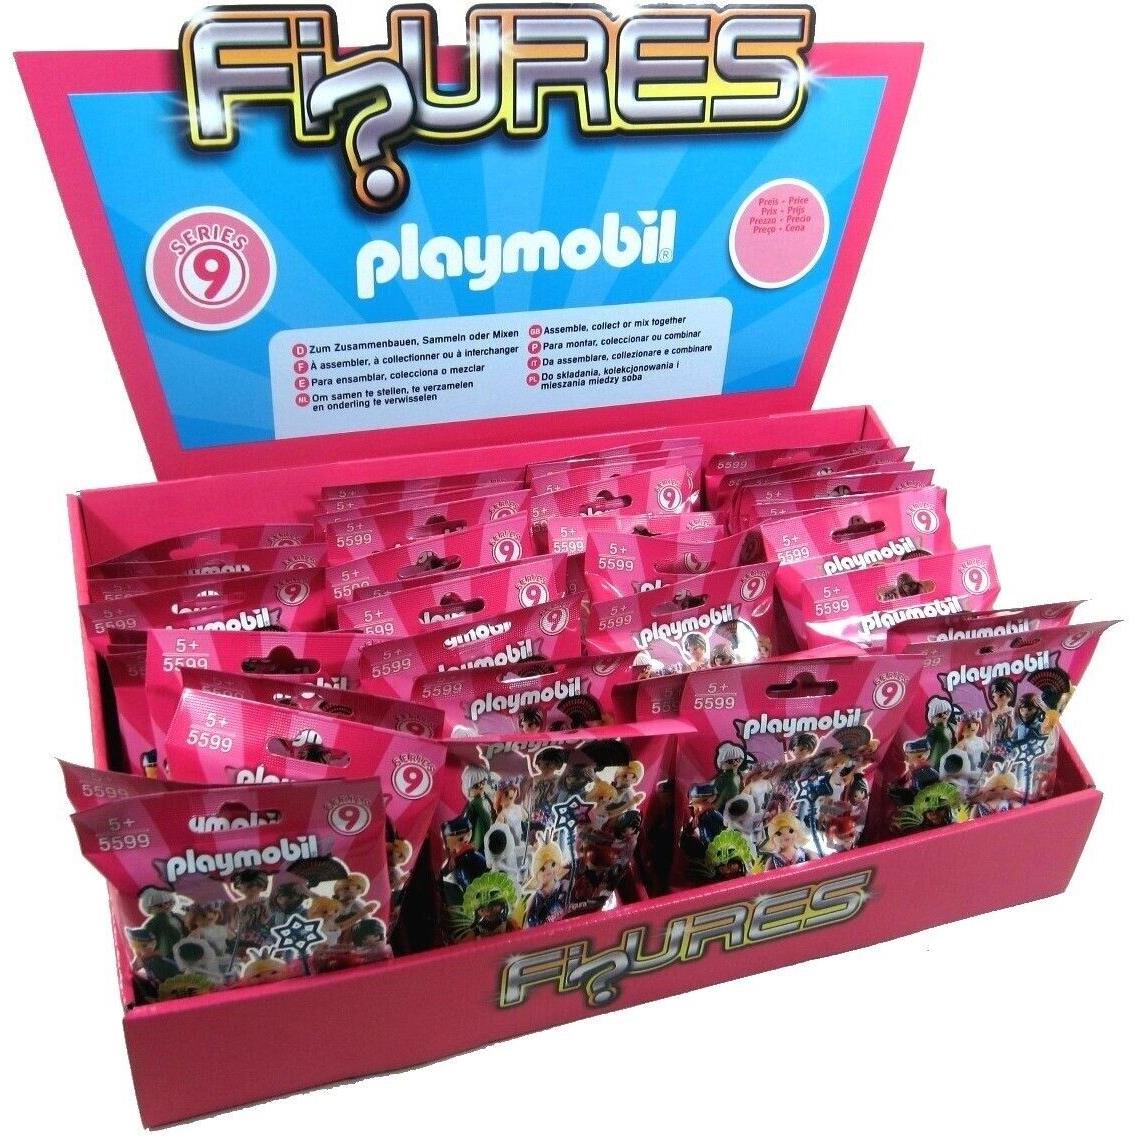 Playmobil 5599 Pink Girls Series 9 Mini Figure Case of 48 Mystery Blind Bags